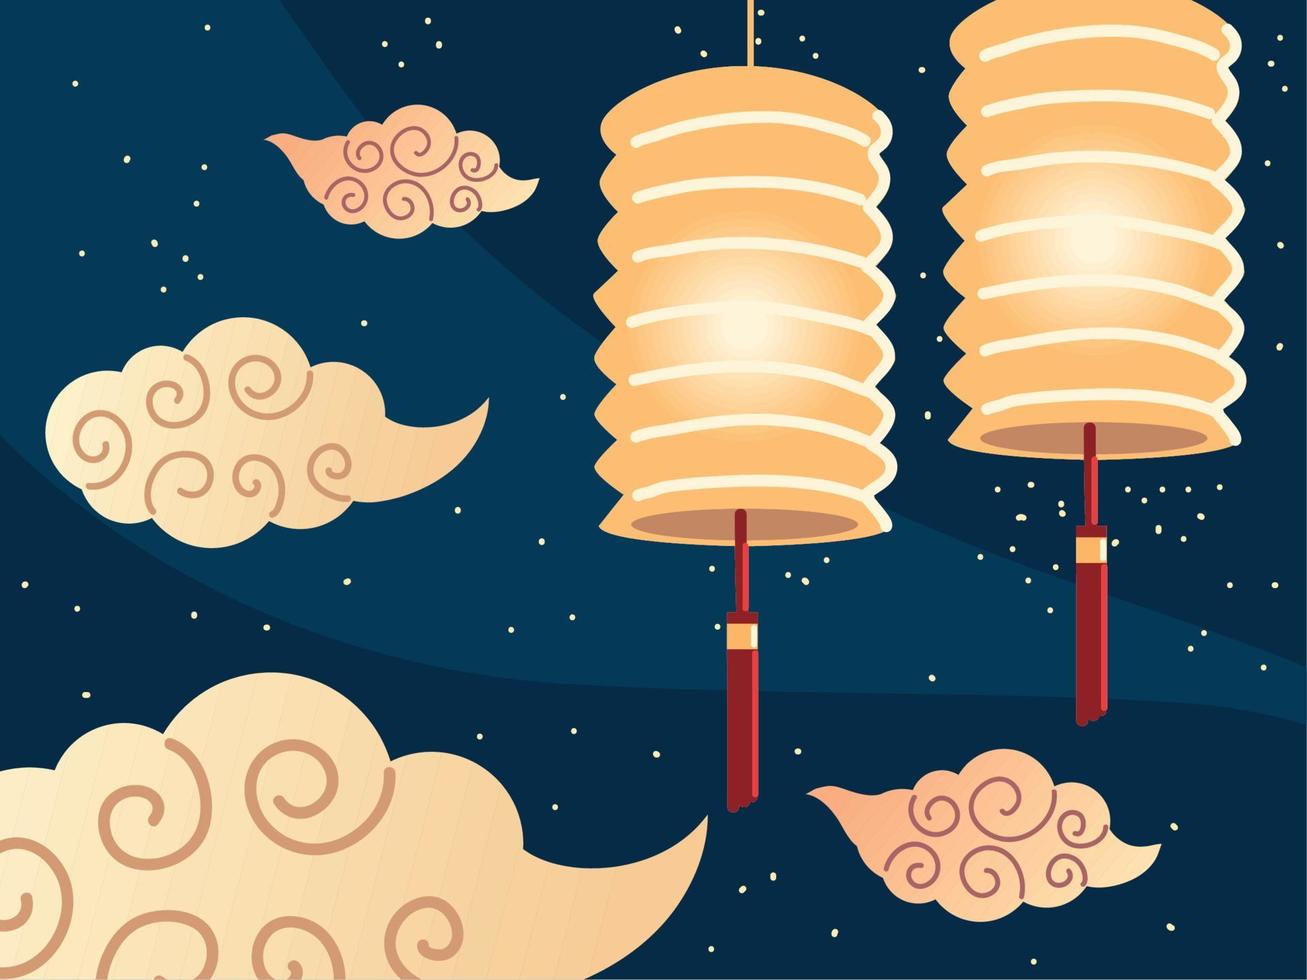 chinese lamps and clouds vector